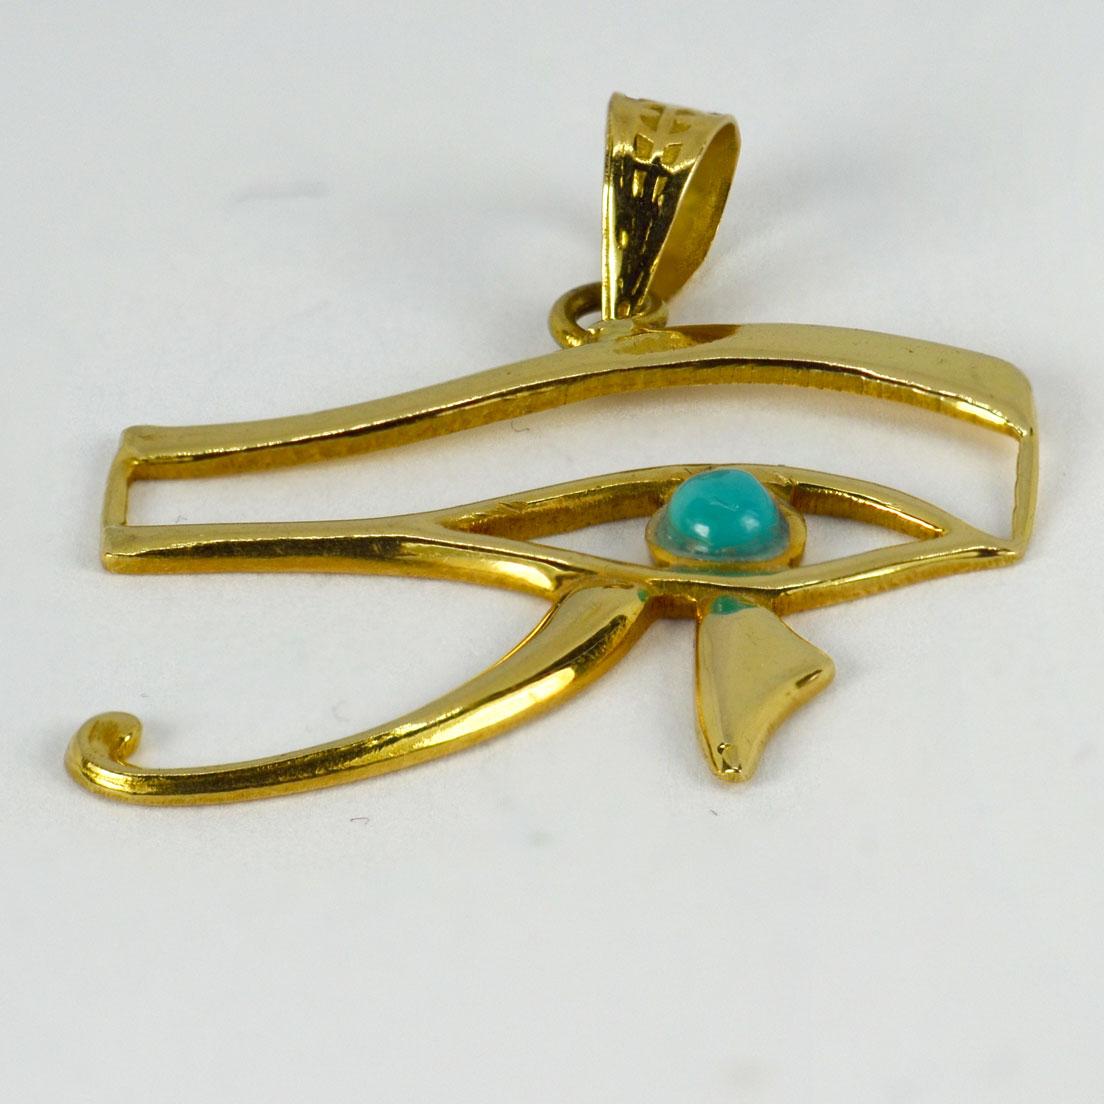 An 18 karat (18K) yellow gold charm pendant depicting the Egyptian Eye of Horus set with a turquoise cabochon to the eye. Stamped with Egyptian marks for 18 karat gold.

Dimensions: 2.5 x 2.7 x 0.25 cm (not including jump ring)
Weight: 2.83 grams
